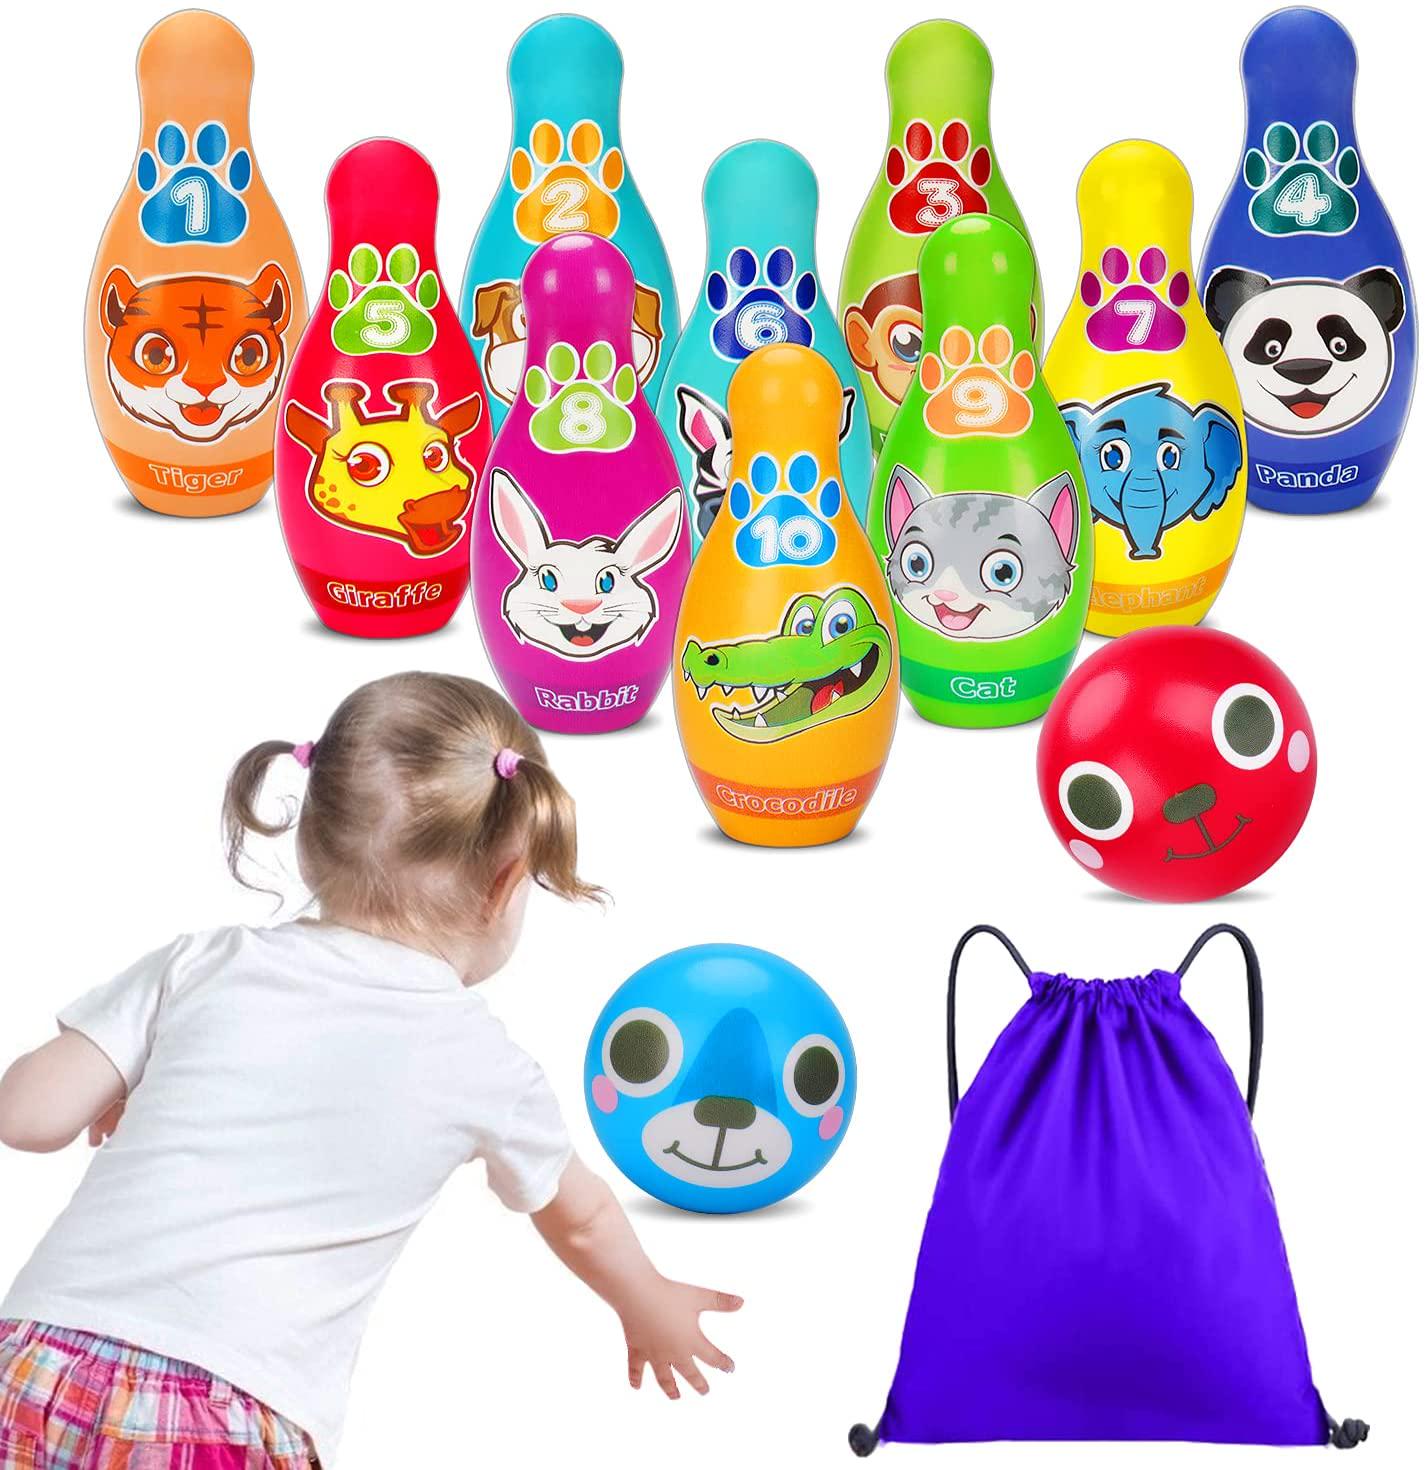 Tsomtto, Kids Bowling Set Toddler Toys for 1 2 3 4 5 Year Old Boys Girls Gifts Soft Foam Bowling Pins with Storage Bag Learning Activities Number 1-10 Cute Animals Indoor Outdoor Games Outside Toys Age 1-3 2-4